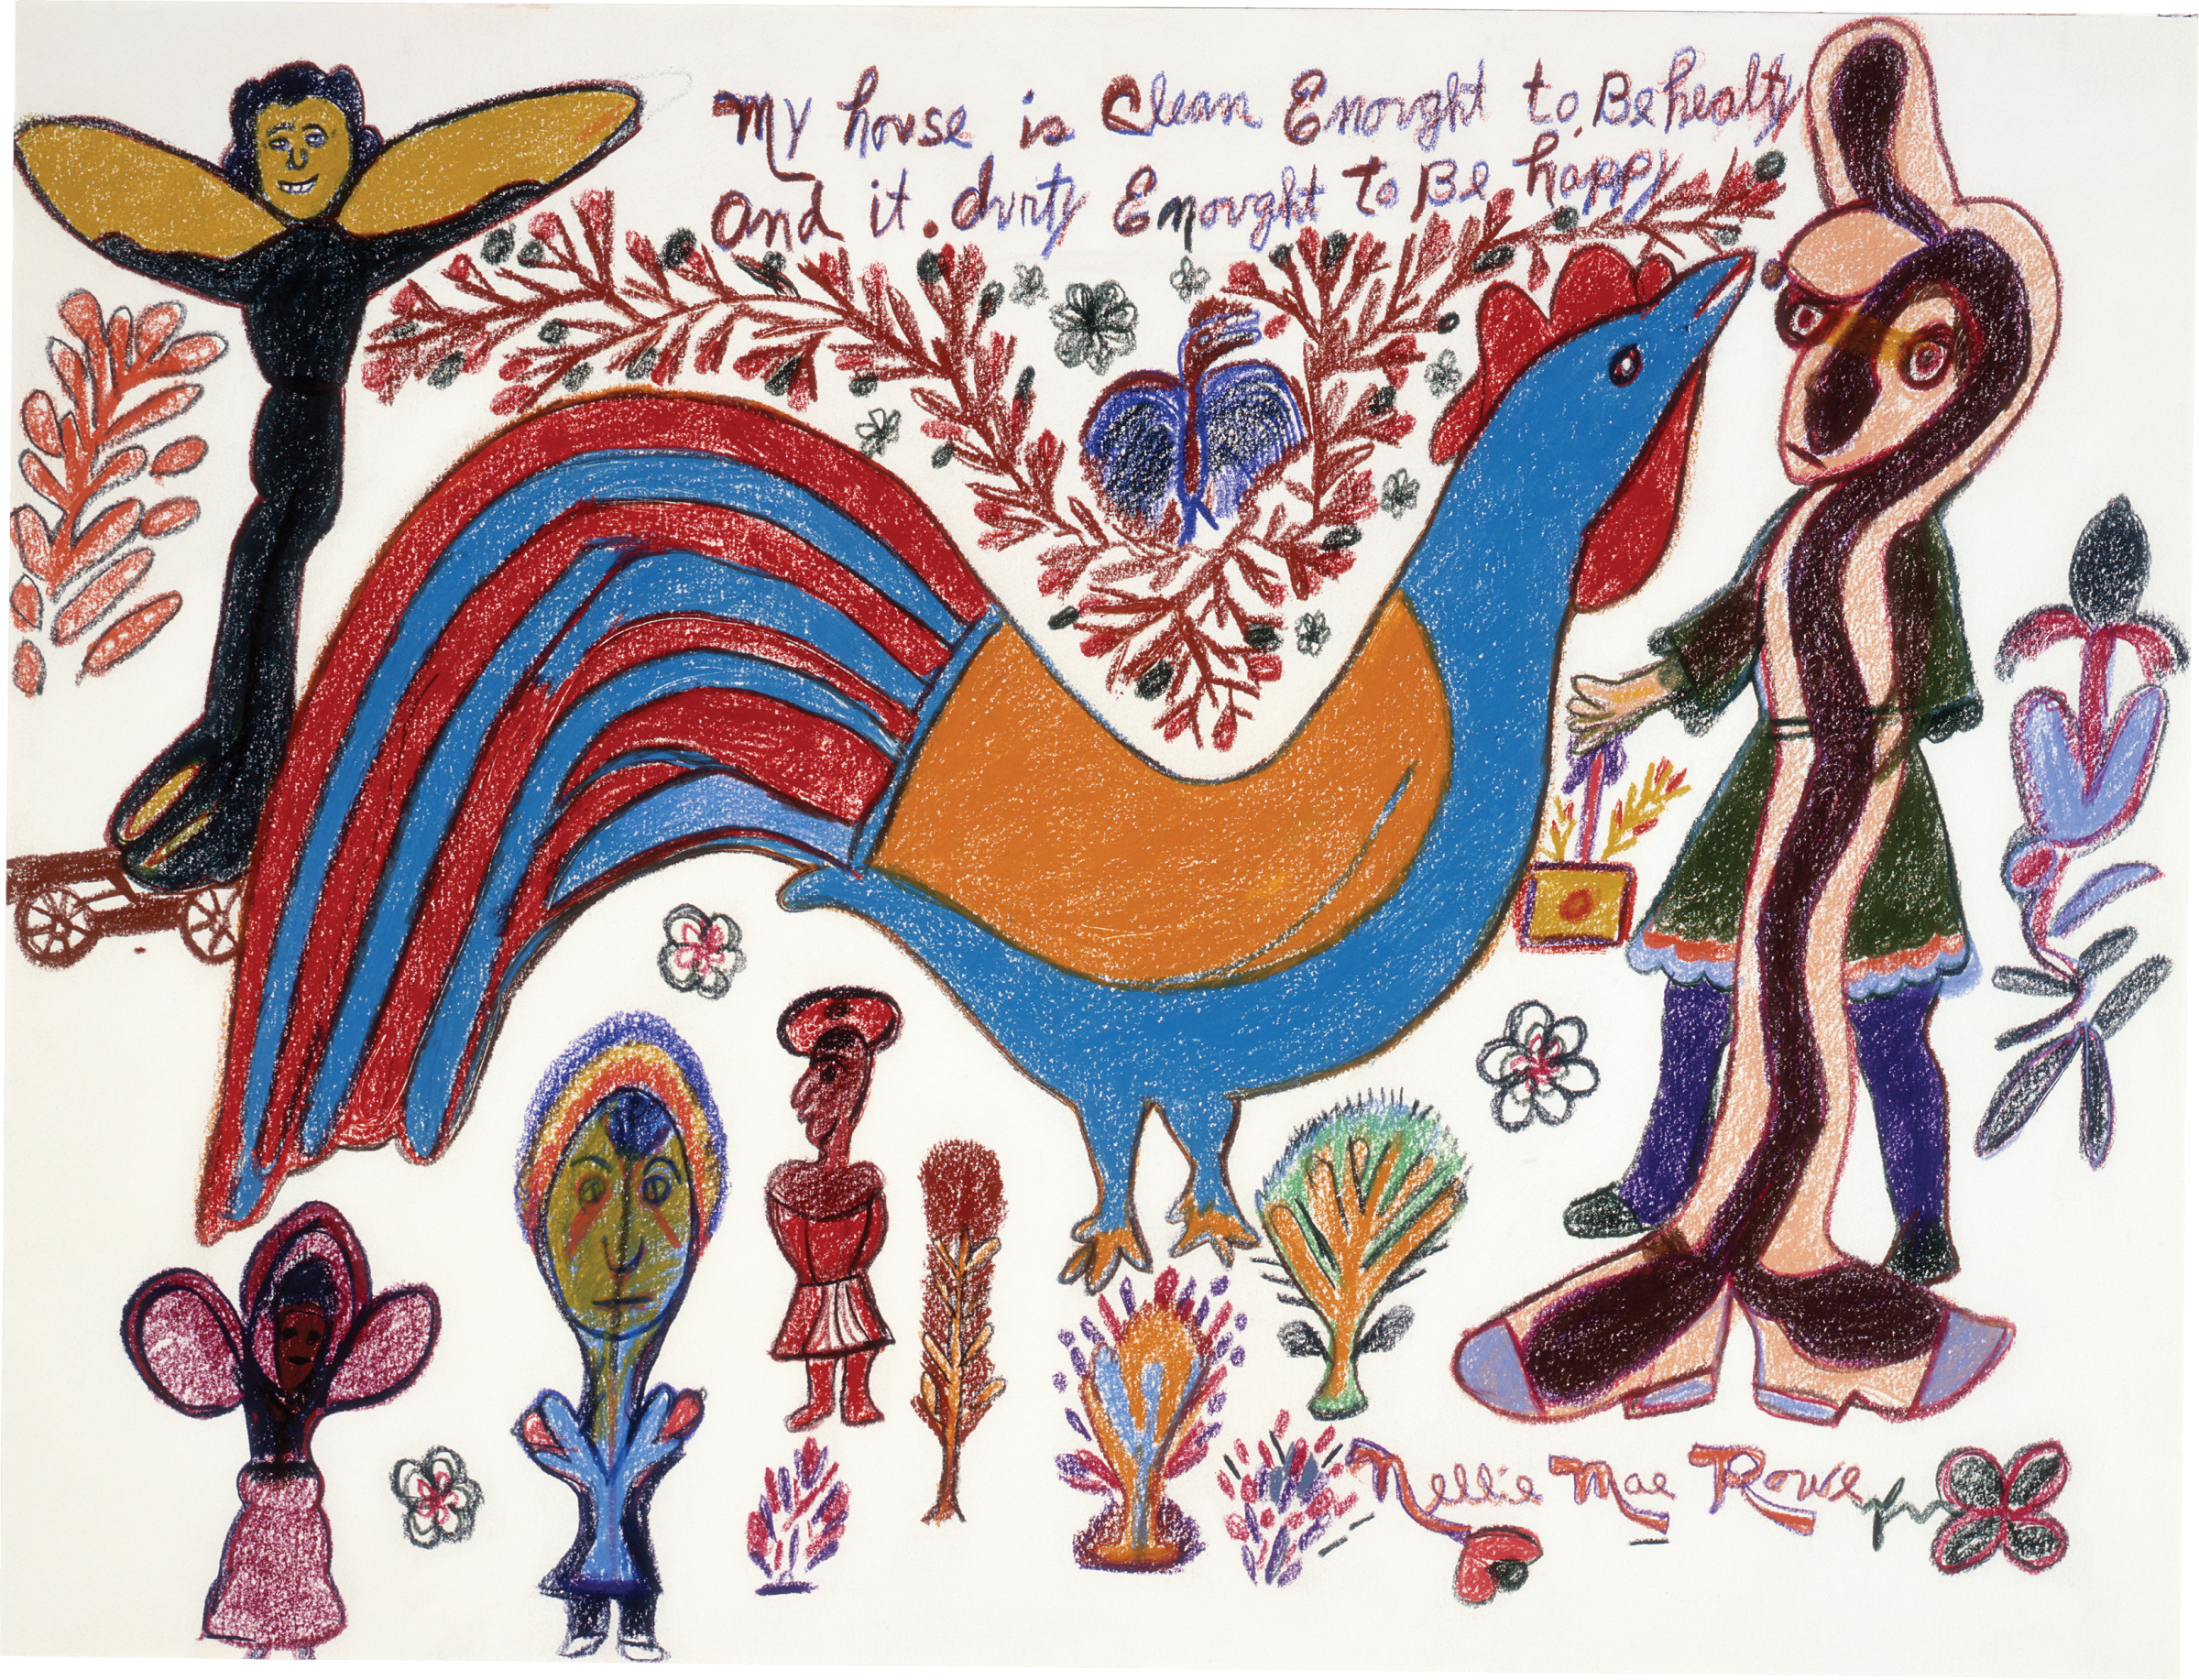 A large blue, red, and orange rooster faces a humanlike figure holding a yellow box; several creatures and plants surround them; text above reads “My house is Clean enough to Be healthy and it dirty Enough to Be happy.”